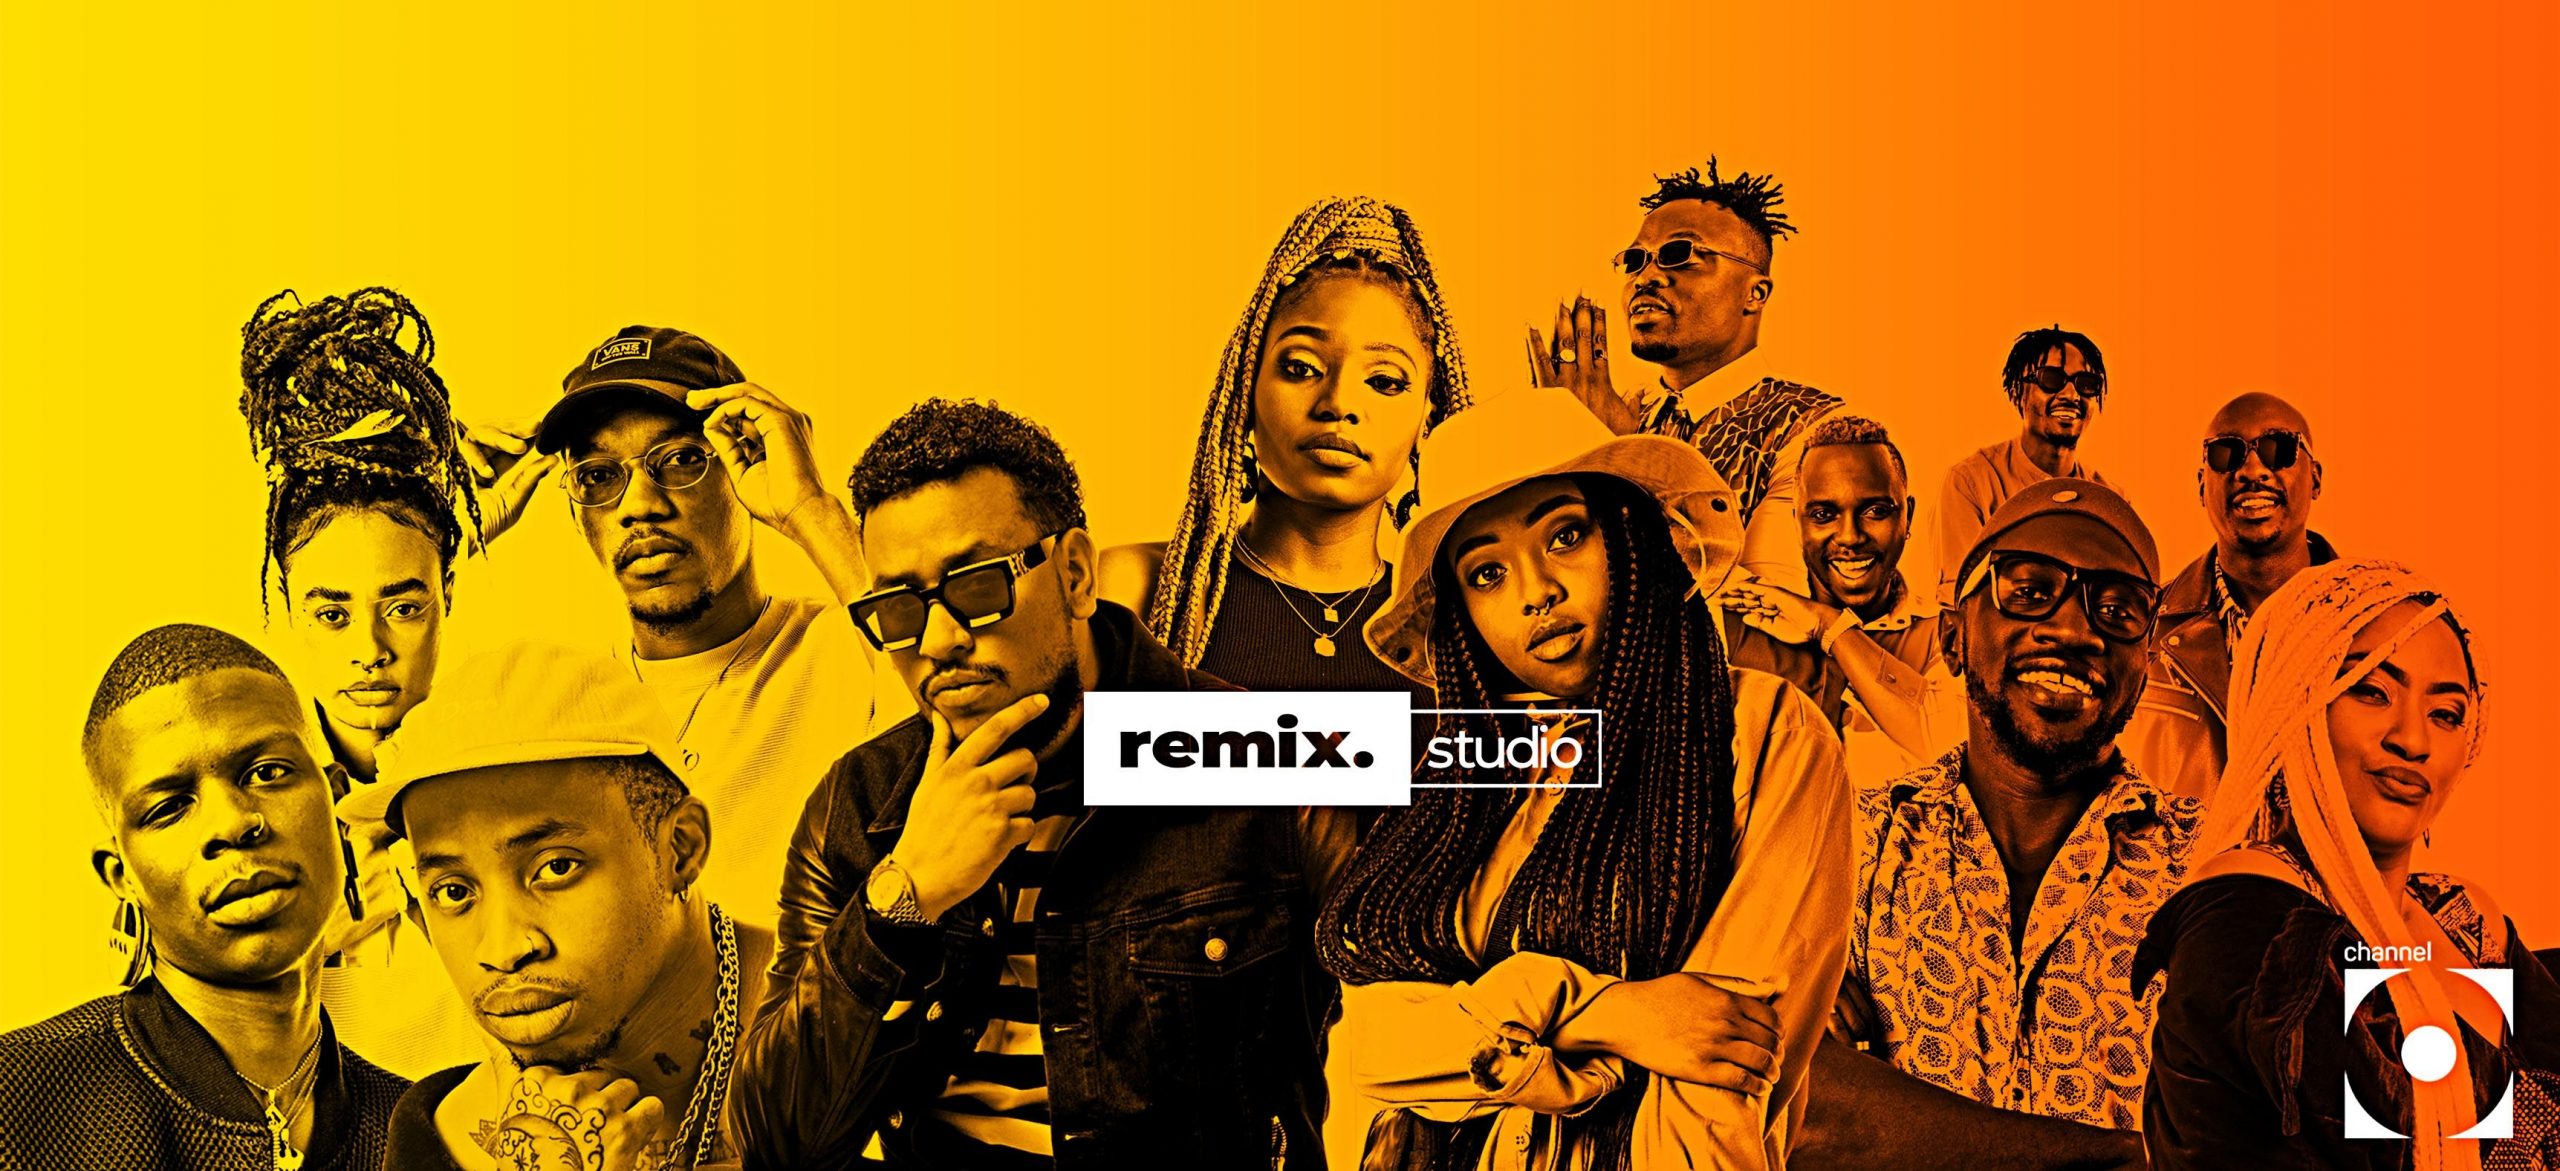 Exciting New Music Show ‘Remix.Studio’ Set To Shake Things Up